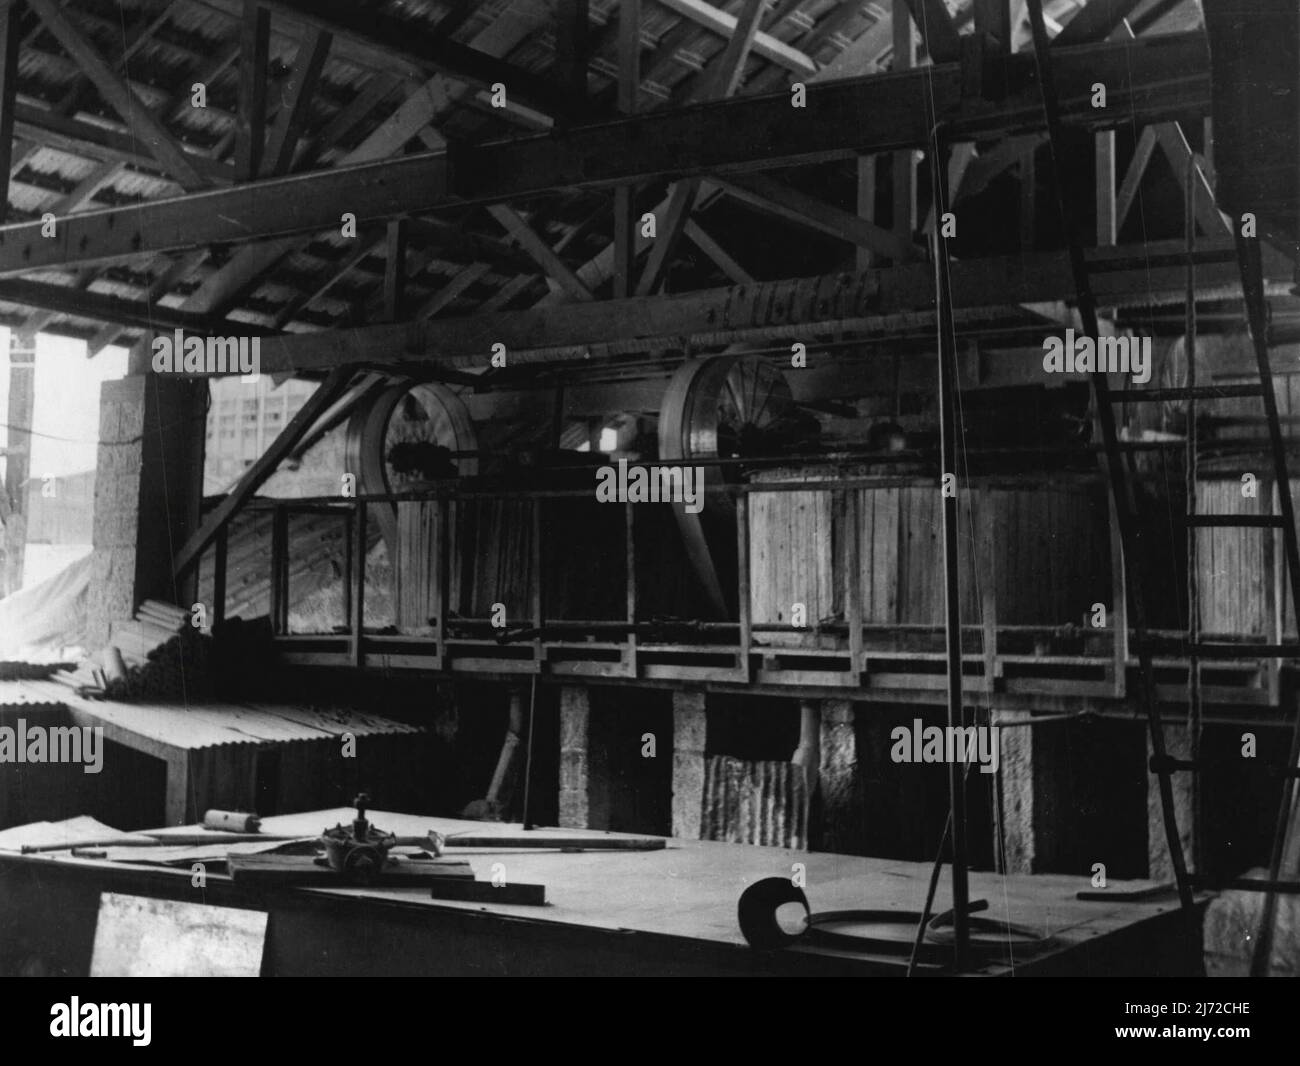 Caustic Soda Plant And Sulphuric Acid Plant -- Causticising Vats for Mixing Lime and Soda Ash. One of the industries being encouraged by the East African Industrial Management Board. September 1, 1951. (Photo by British Official Photograph). Stock Photo